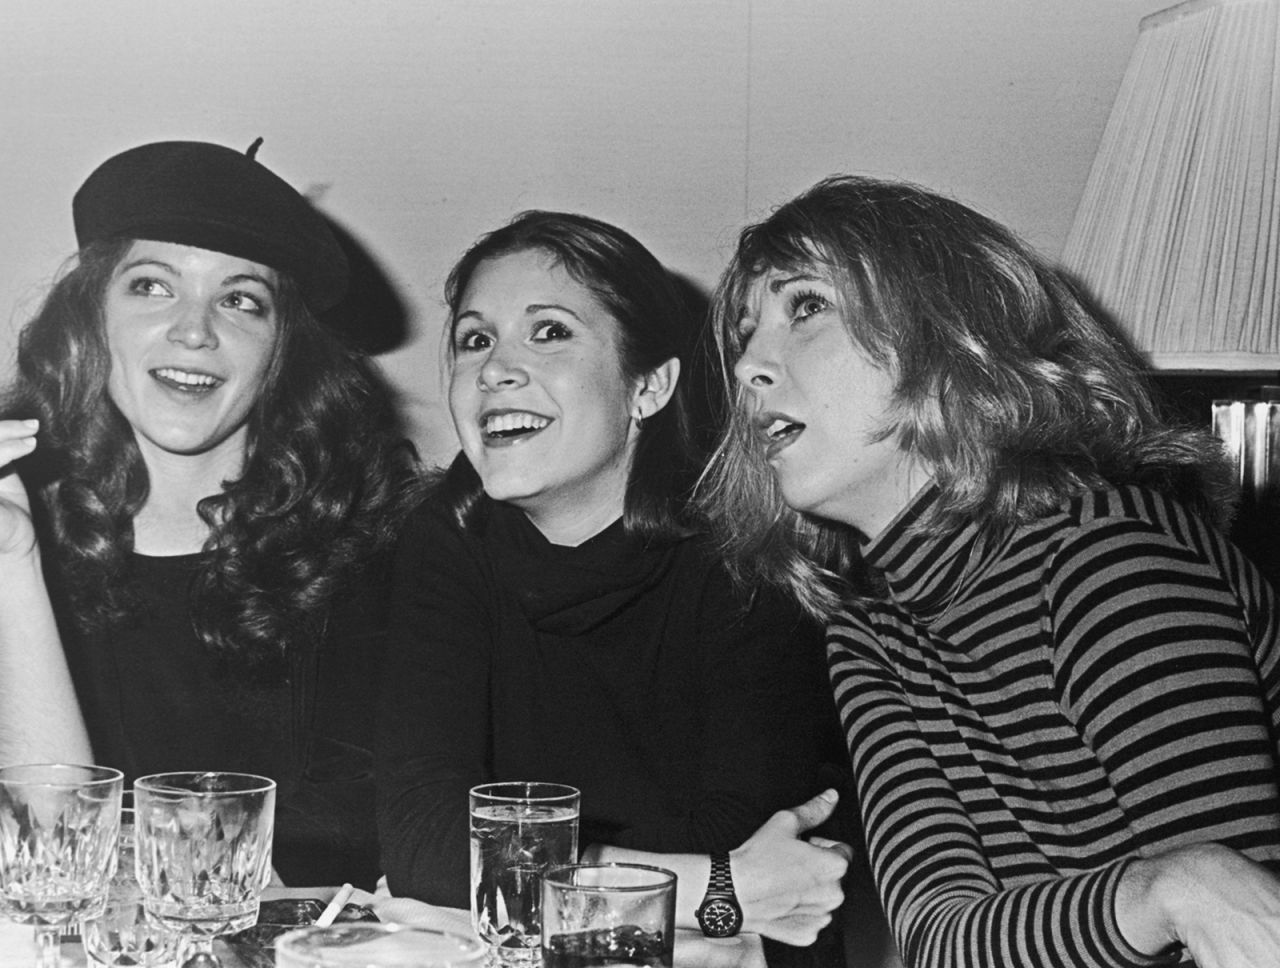 Fisher sits between fellow actresses Amy Irving, left, and Teri Garr in 1978.